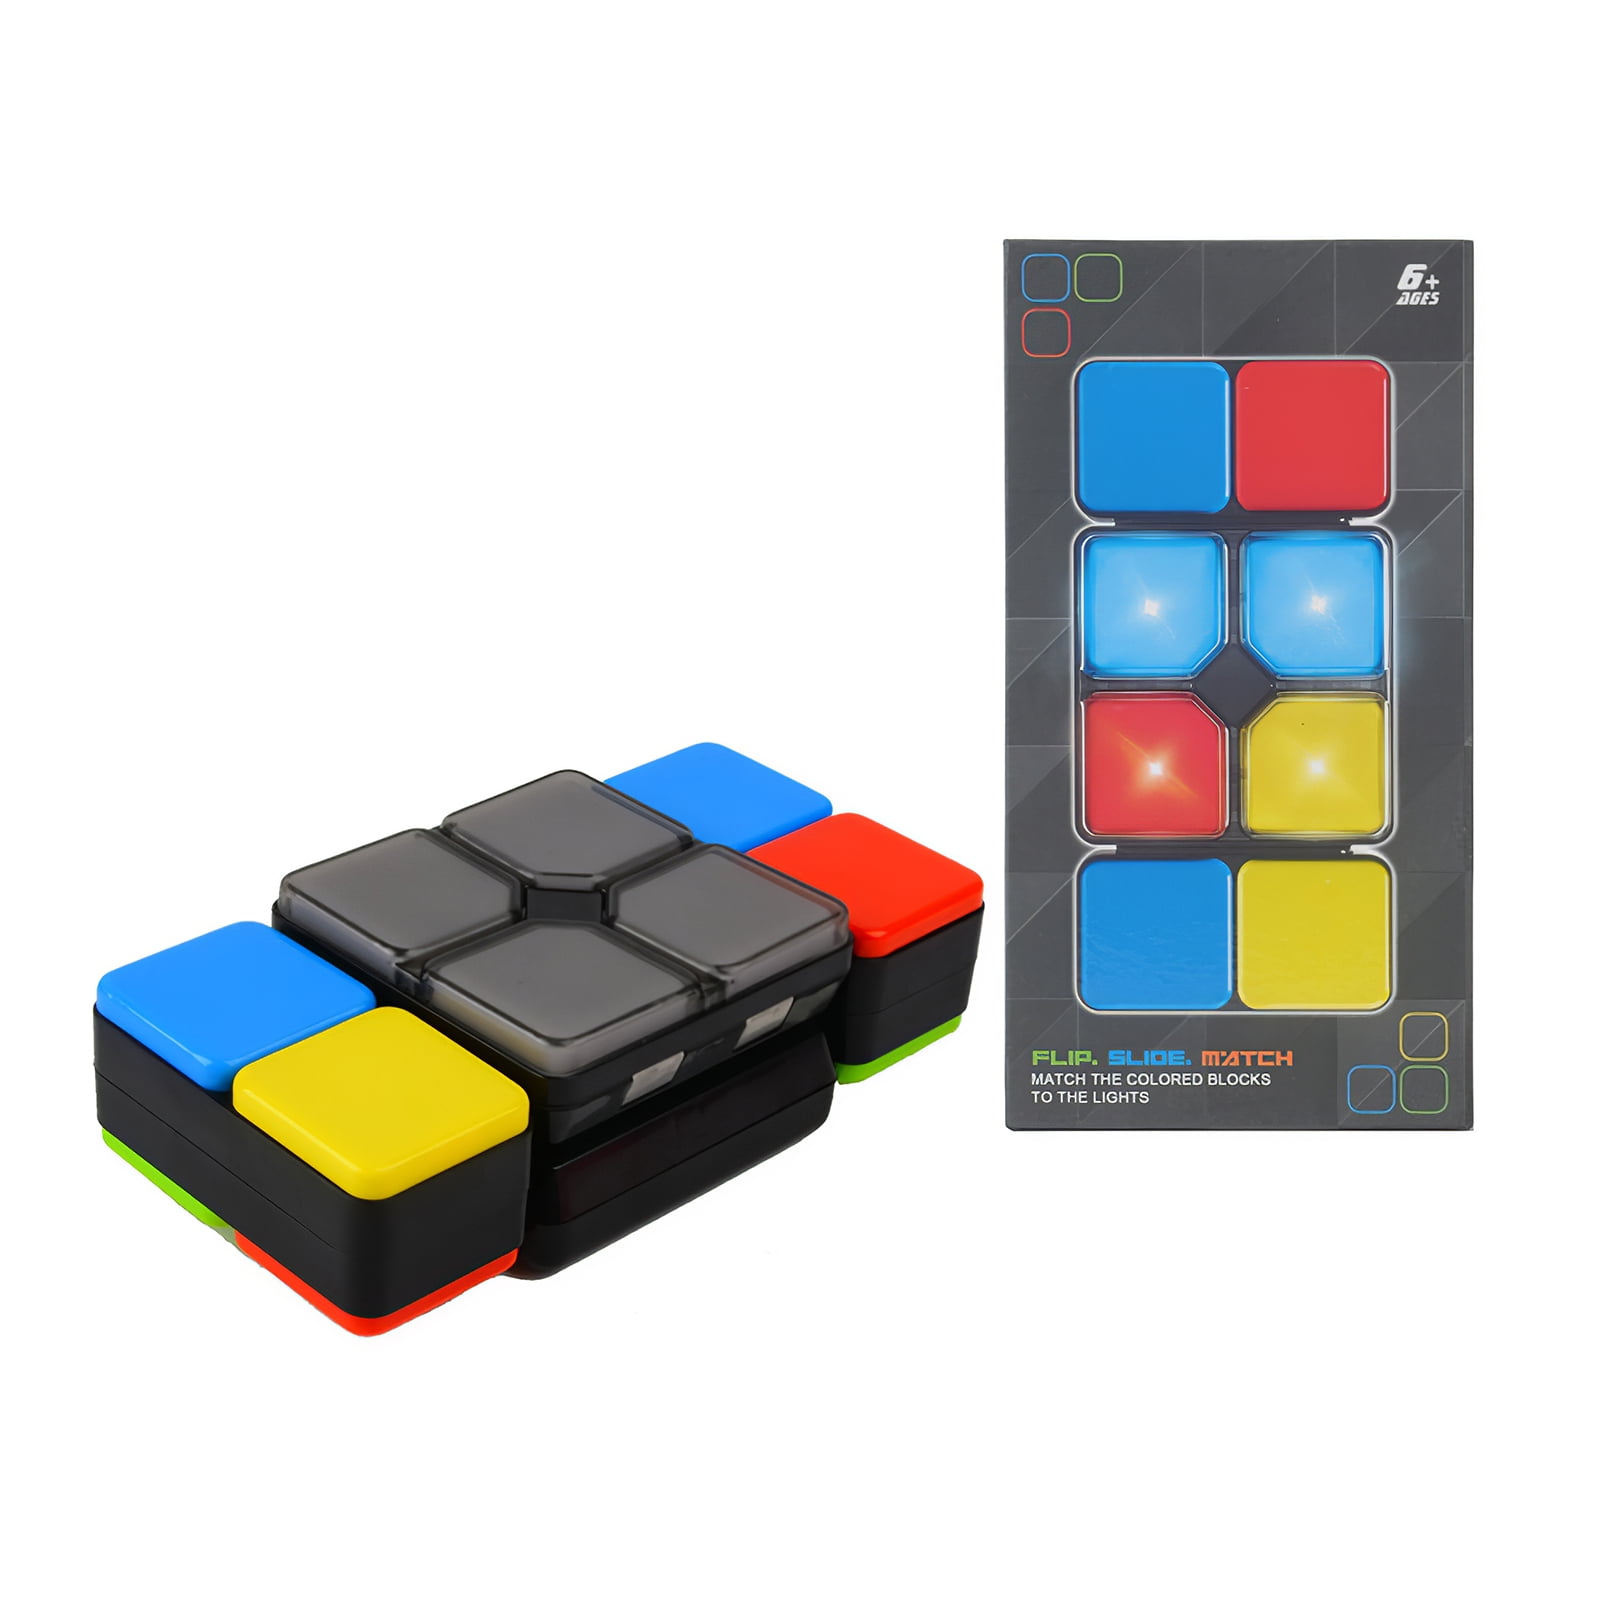 Details about   Interactive magic cube Puzzle game for kids playing electronic music toy gift